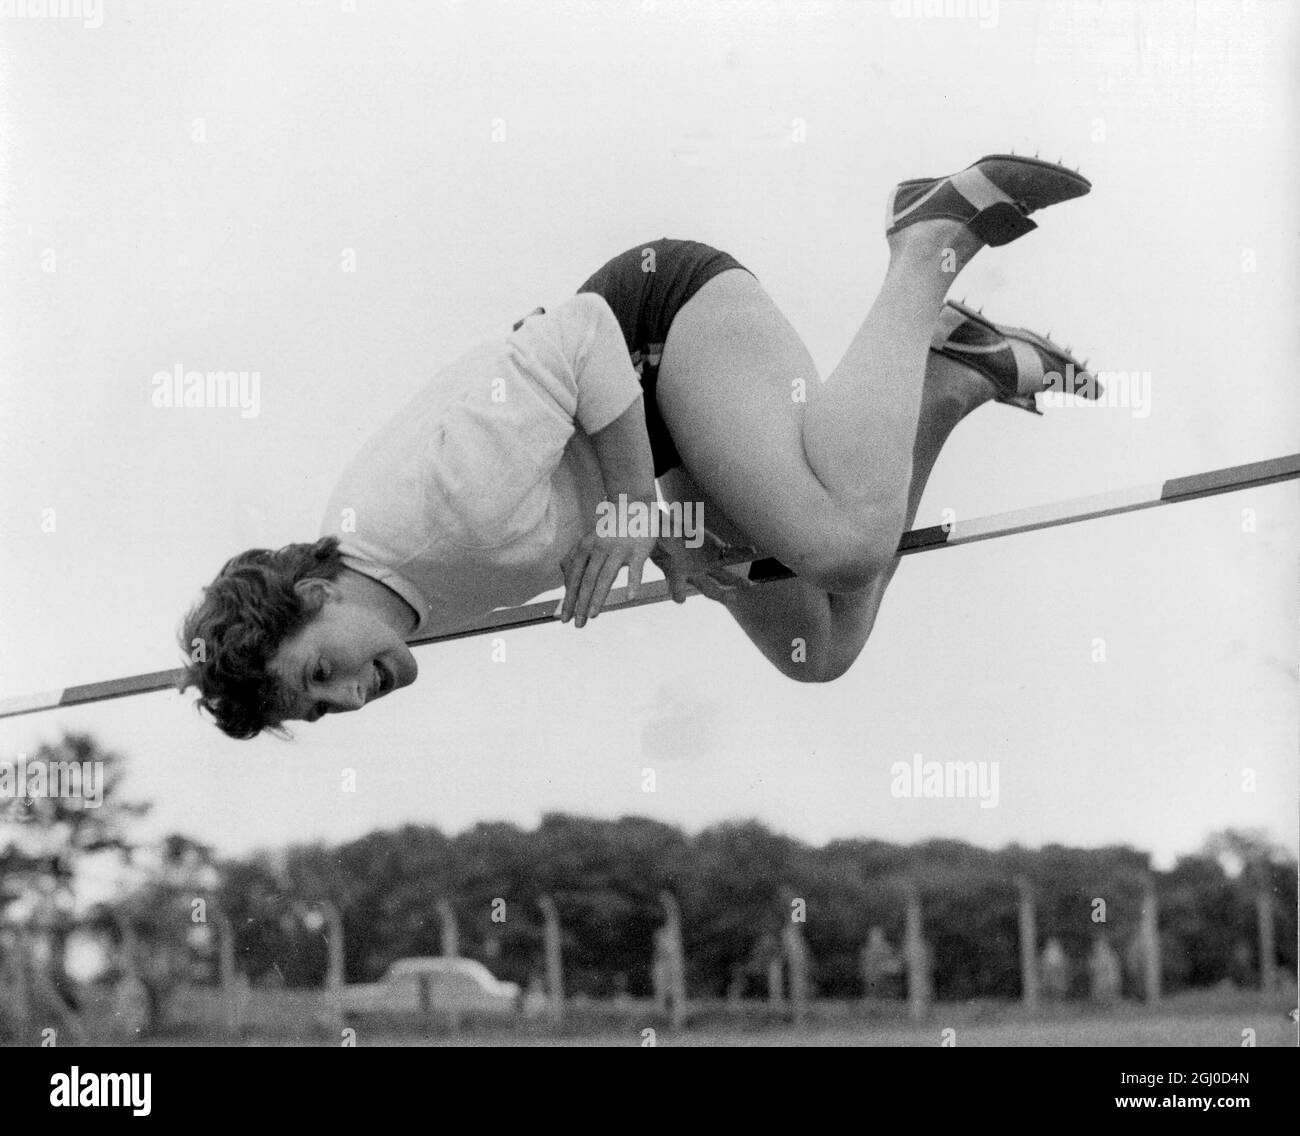 Over the top goes Olympic high jump star Thelma Hopkins, to win the competition for the Northern Women's Inter Counties A A Championships at Leeds. 27th May 1957 Stock Photo